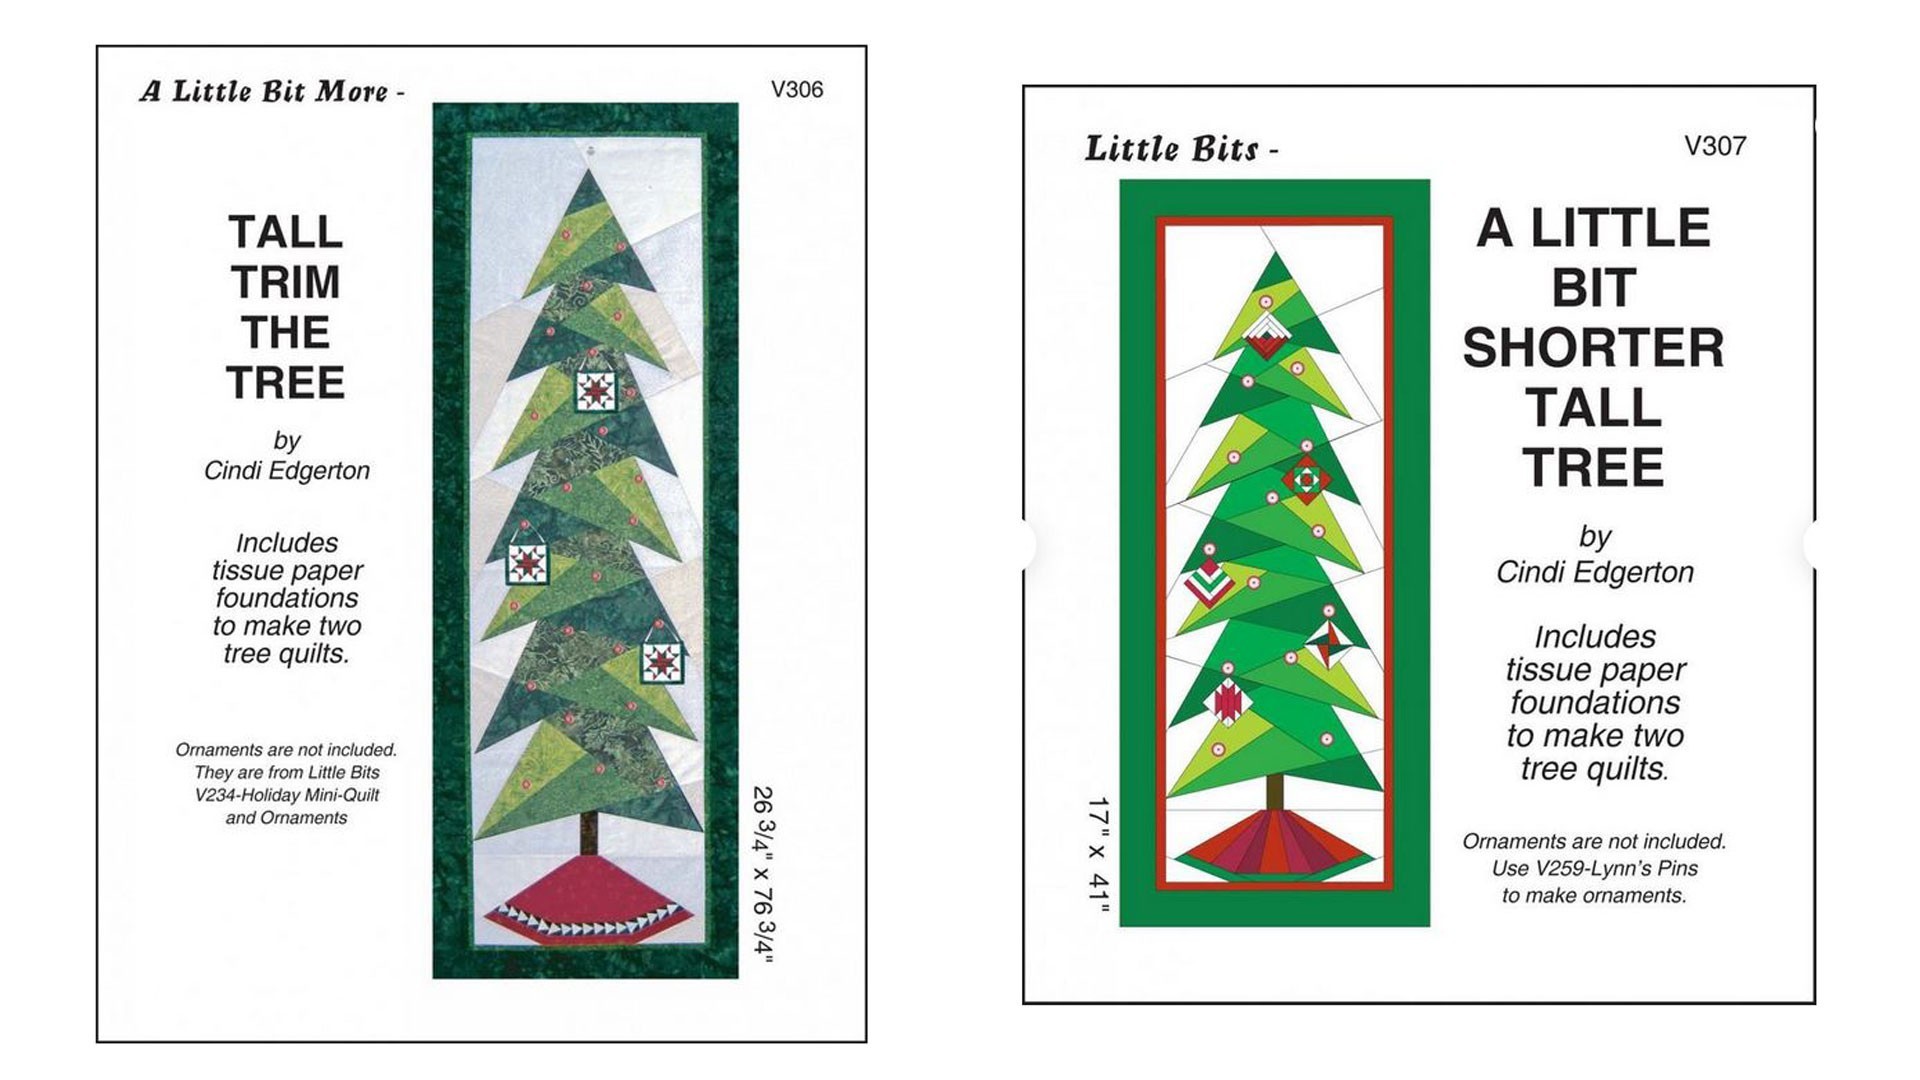 Tall Trim The Tree Featured Image Graphic